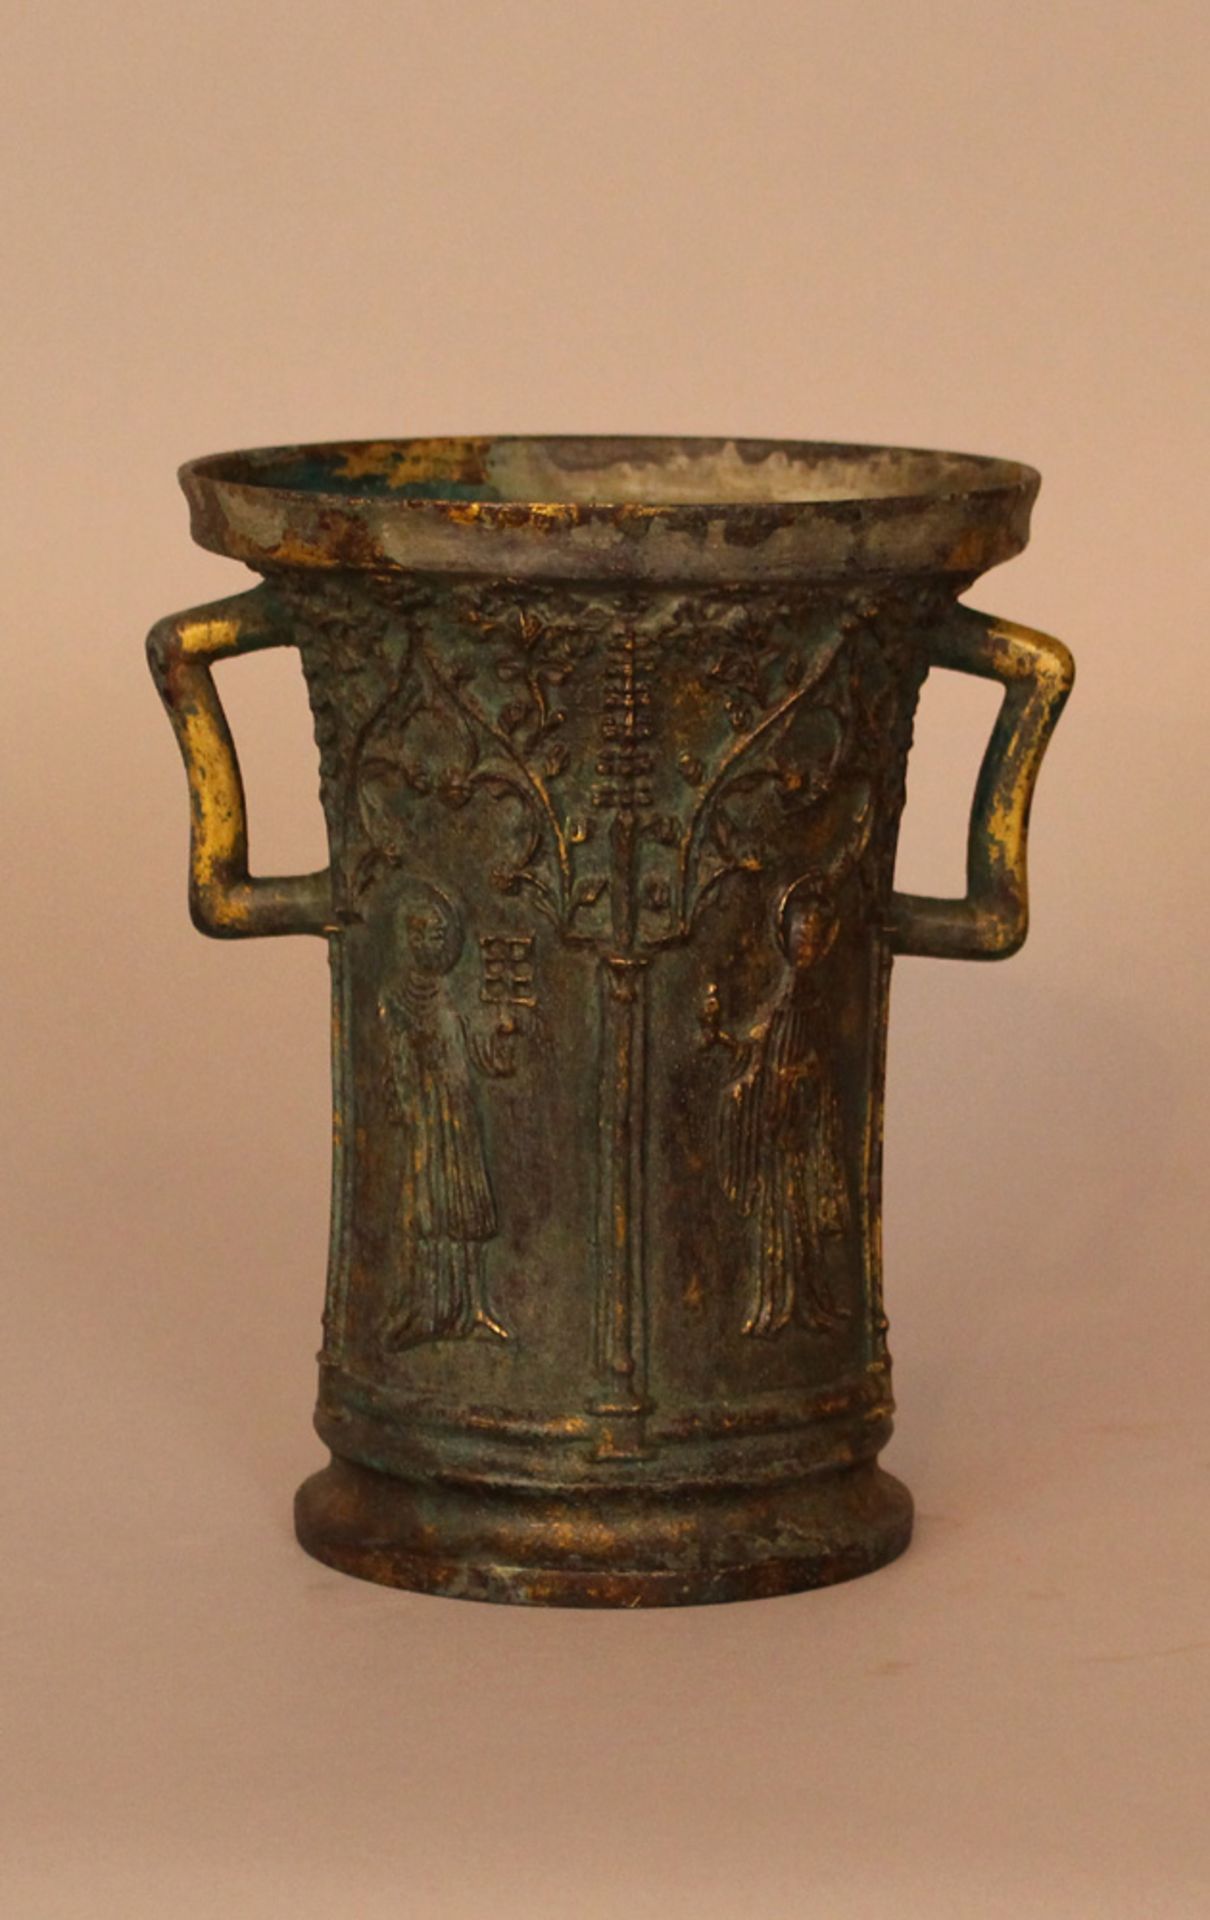 Vessel in Gothic manner, bronze cast with figures and ornaments in half relief; two handgrips,